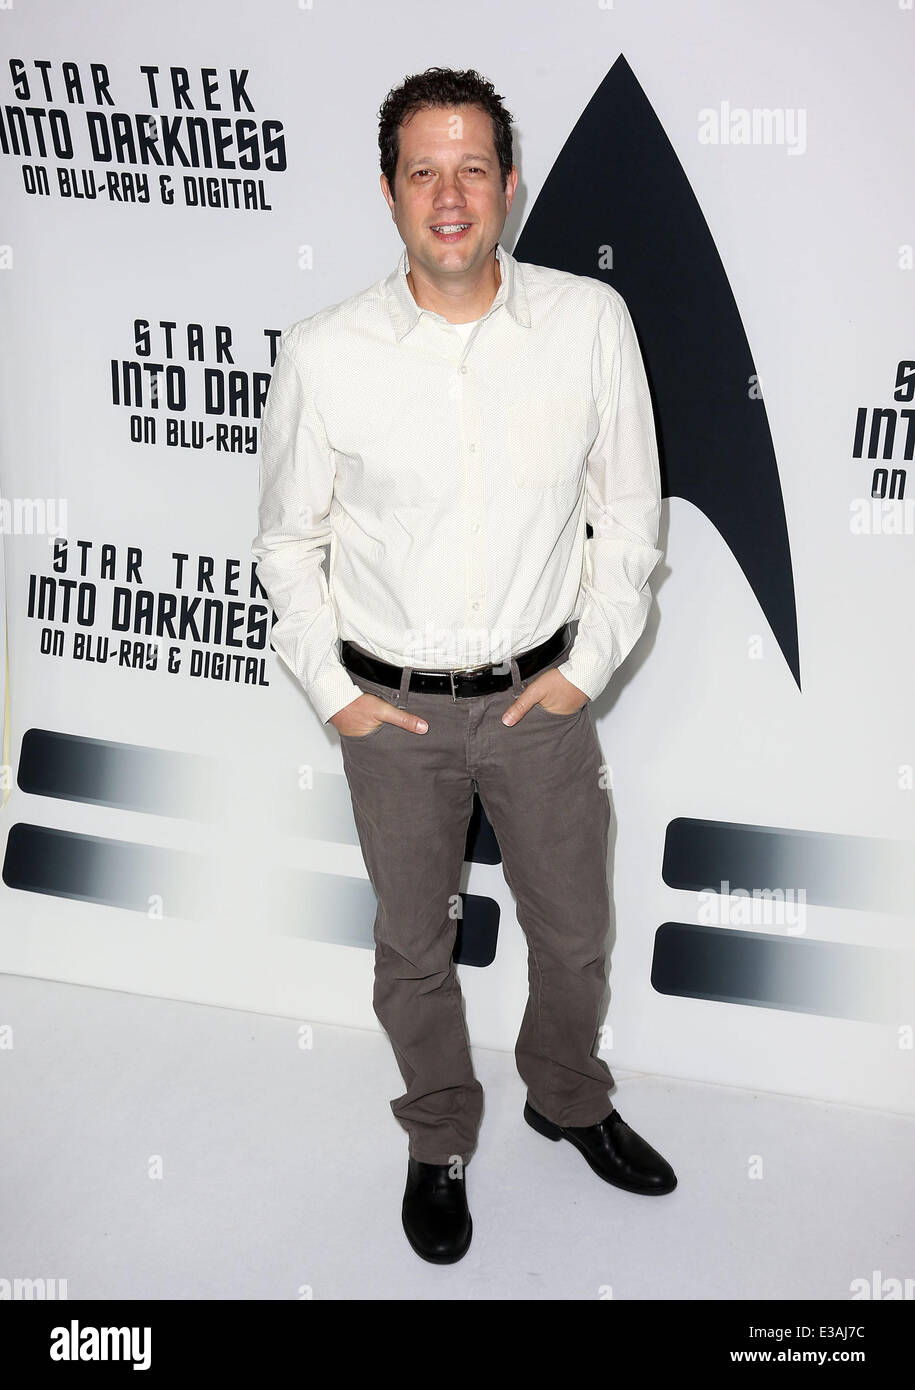 'Star Trek: Into Darkness' Blu-ray and DVD debut at California Science Center  Featuring: Michael Giacchino Where: Los Angeles, California, United States When: 10 Sep 2013 Stock Photo